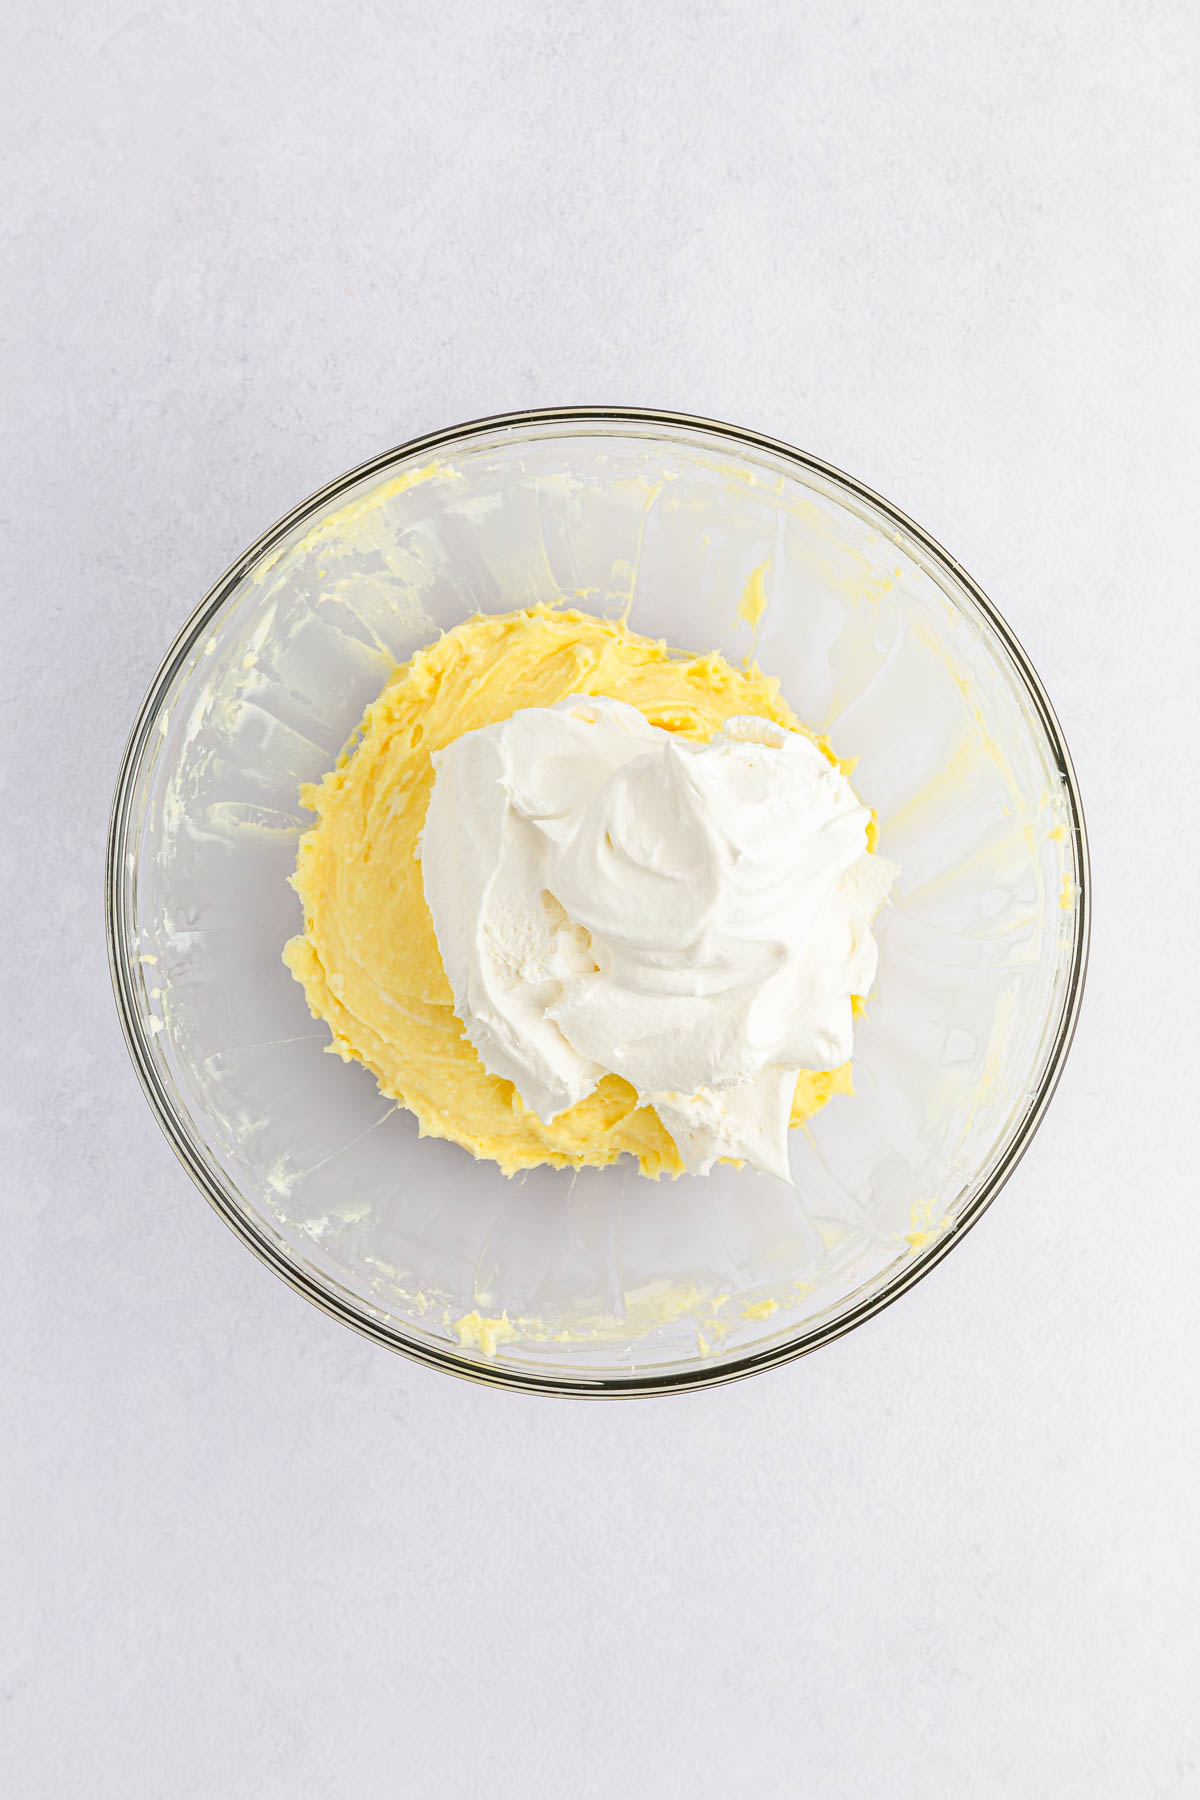 Cool Whip and cream cheese mixture in bowl